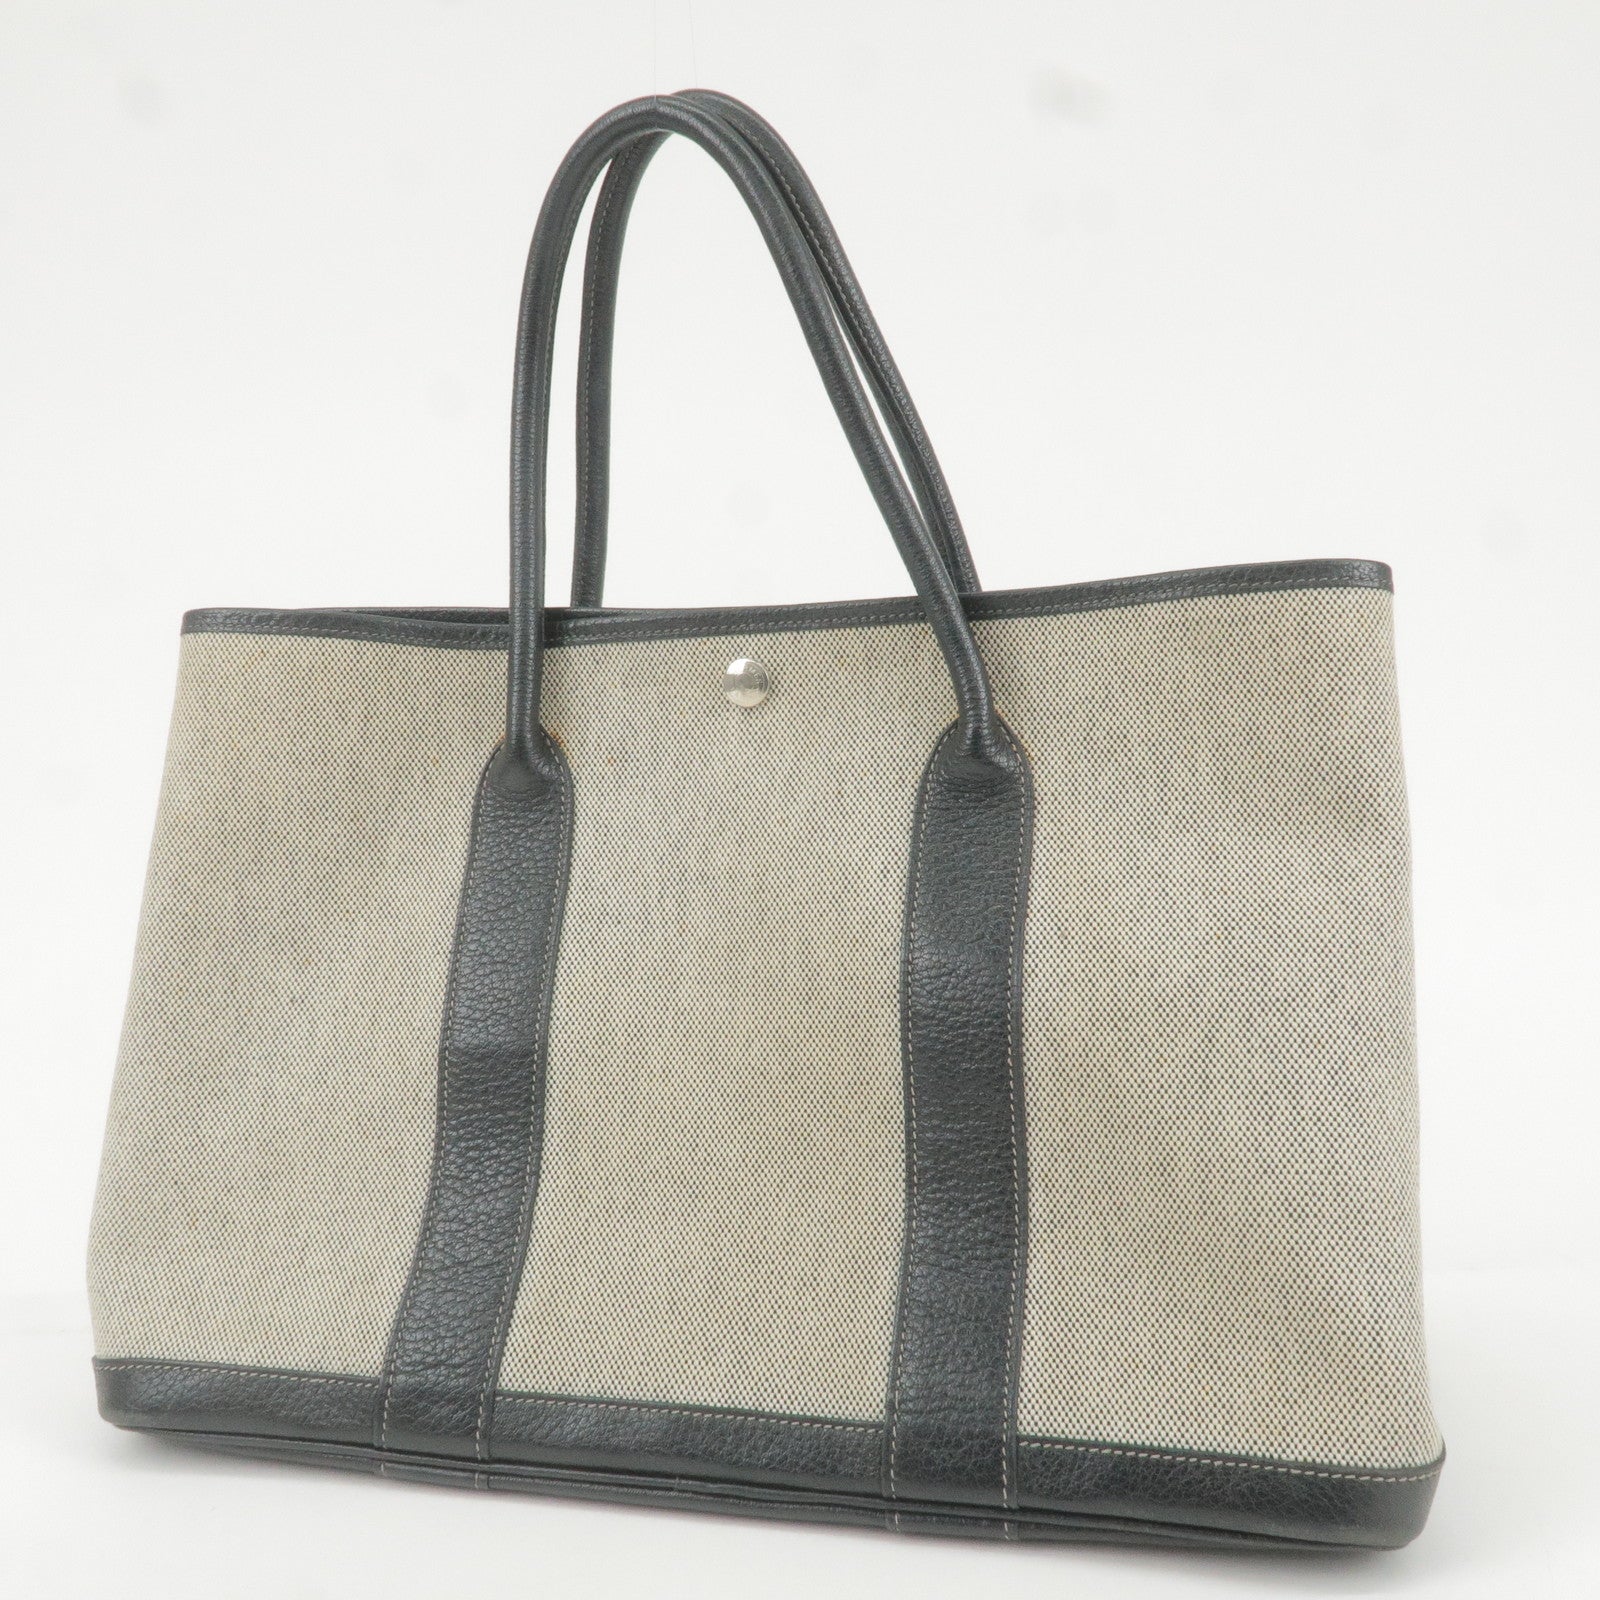 Garden - Toile - hermes pre owned square neck slip dress item - Bag -  Leather - HERMES - Ash - Black – dct - Tote - PM - Gray - ep_vintage luxury  Store - Party